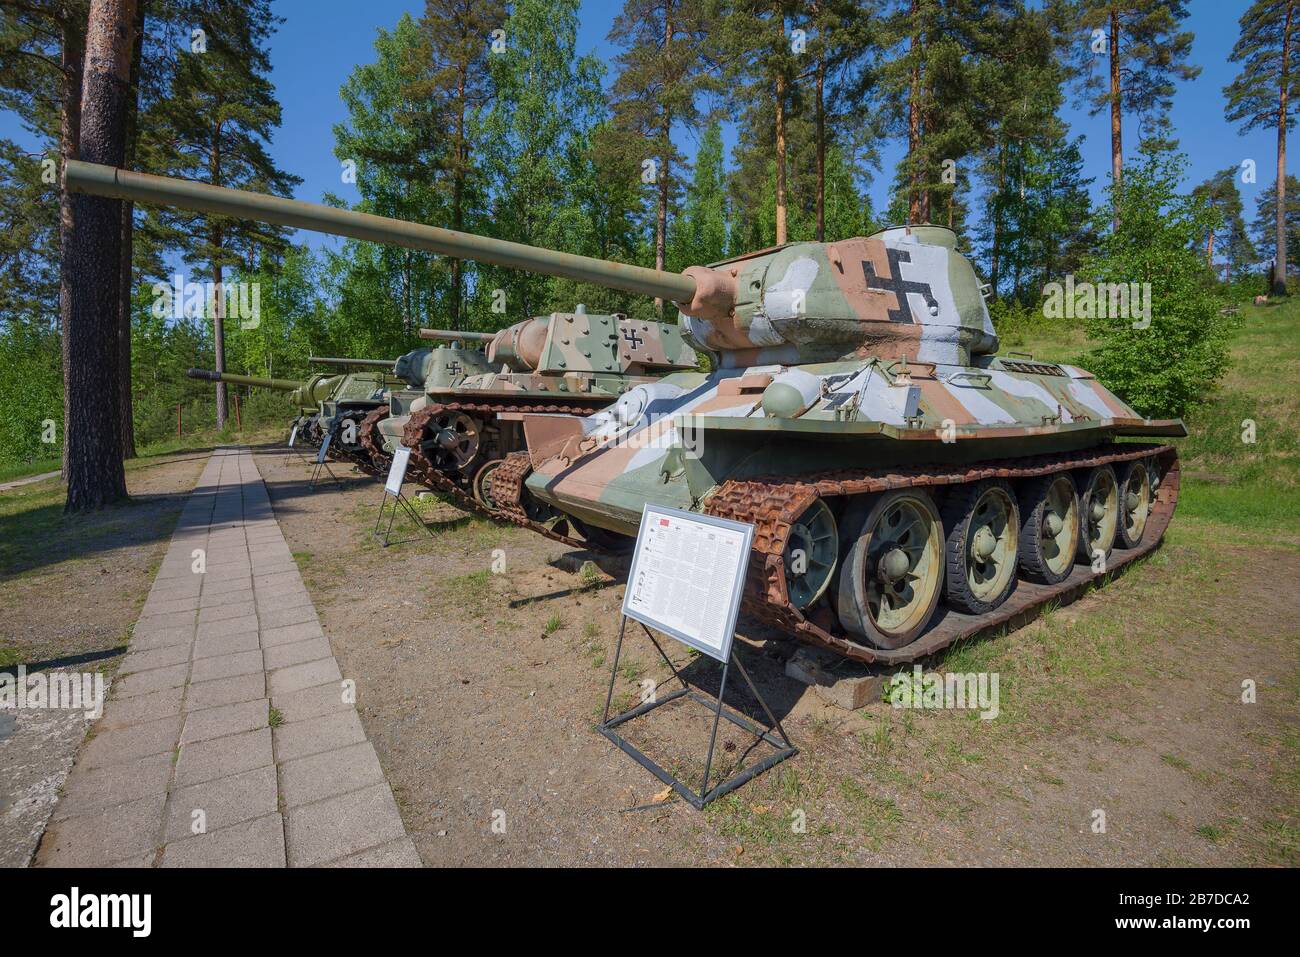 PAROLA, FINLAND - JUNE 10, 2017: Soviet captured tank T-34-85 in the Finnish army painting in the museum of armored vehicles of the Parola city Stock Photo